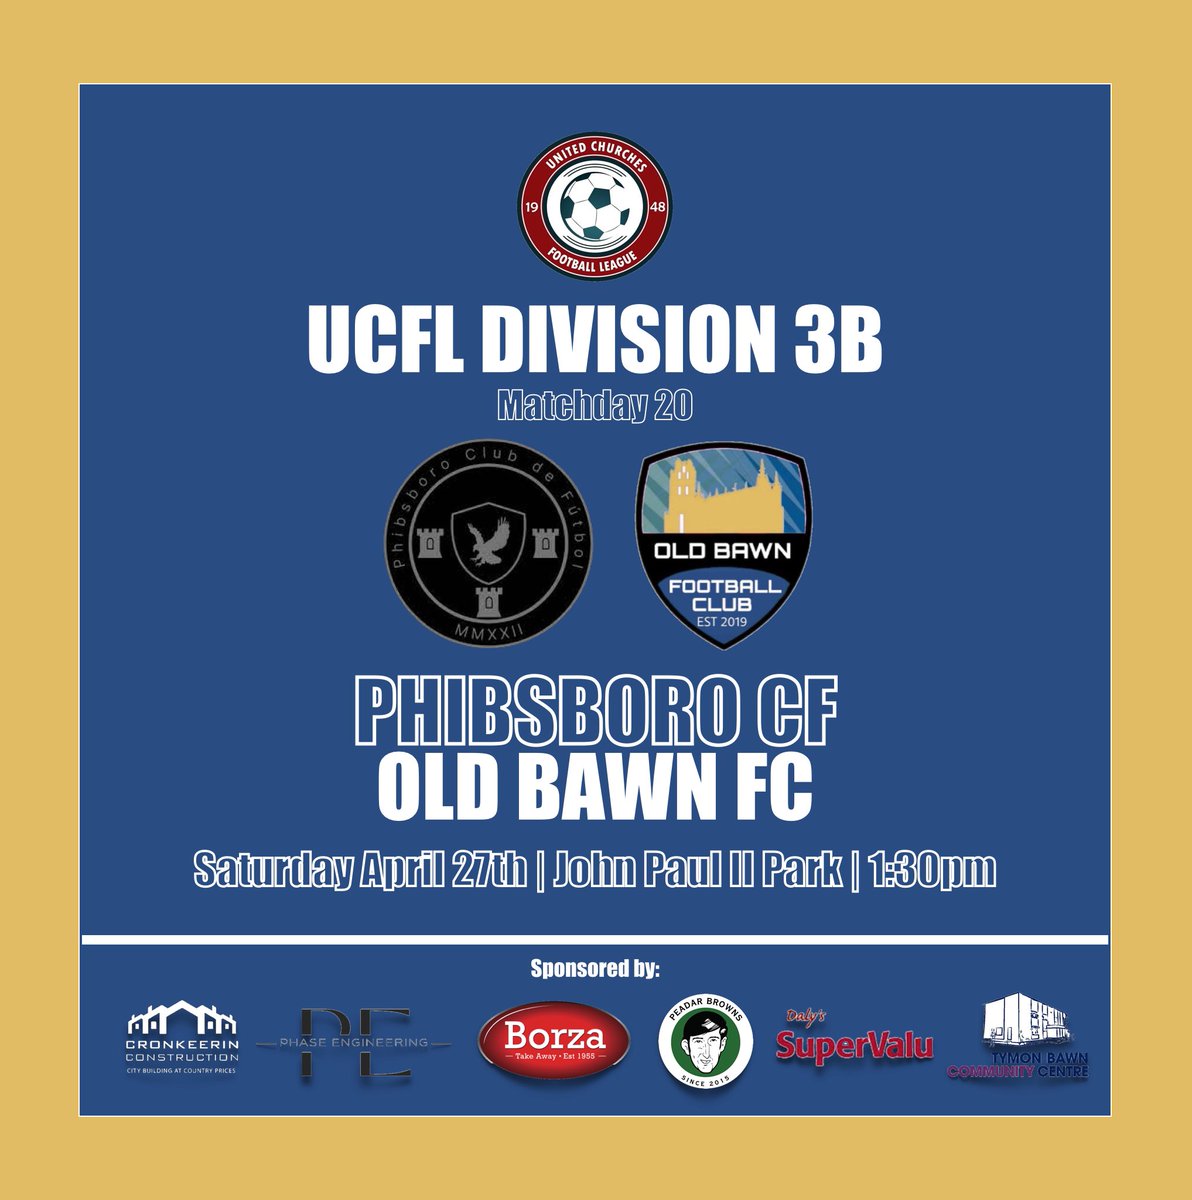 Just one fixture for the club this weekend with our UCFL side in action away to Phibsboro CF.

1:30pm kick off in Cabra, all support welcome! 🔵⚫️ #UpTheBawn